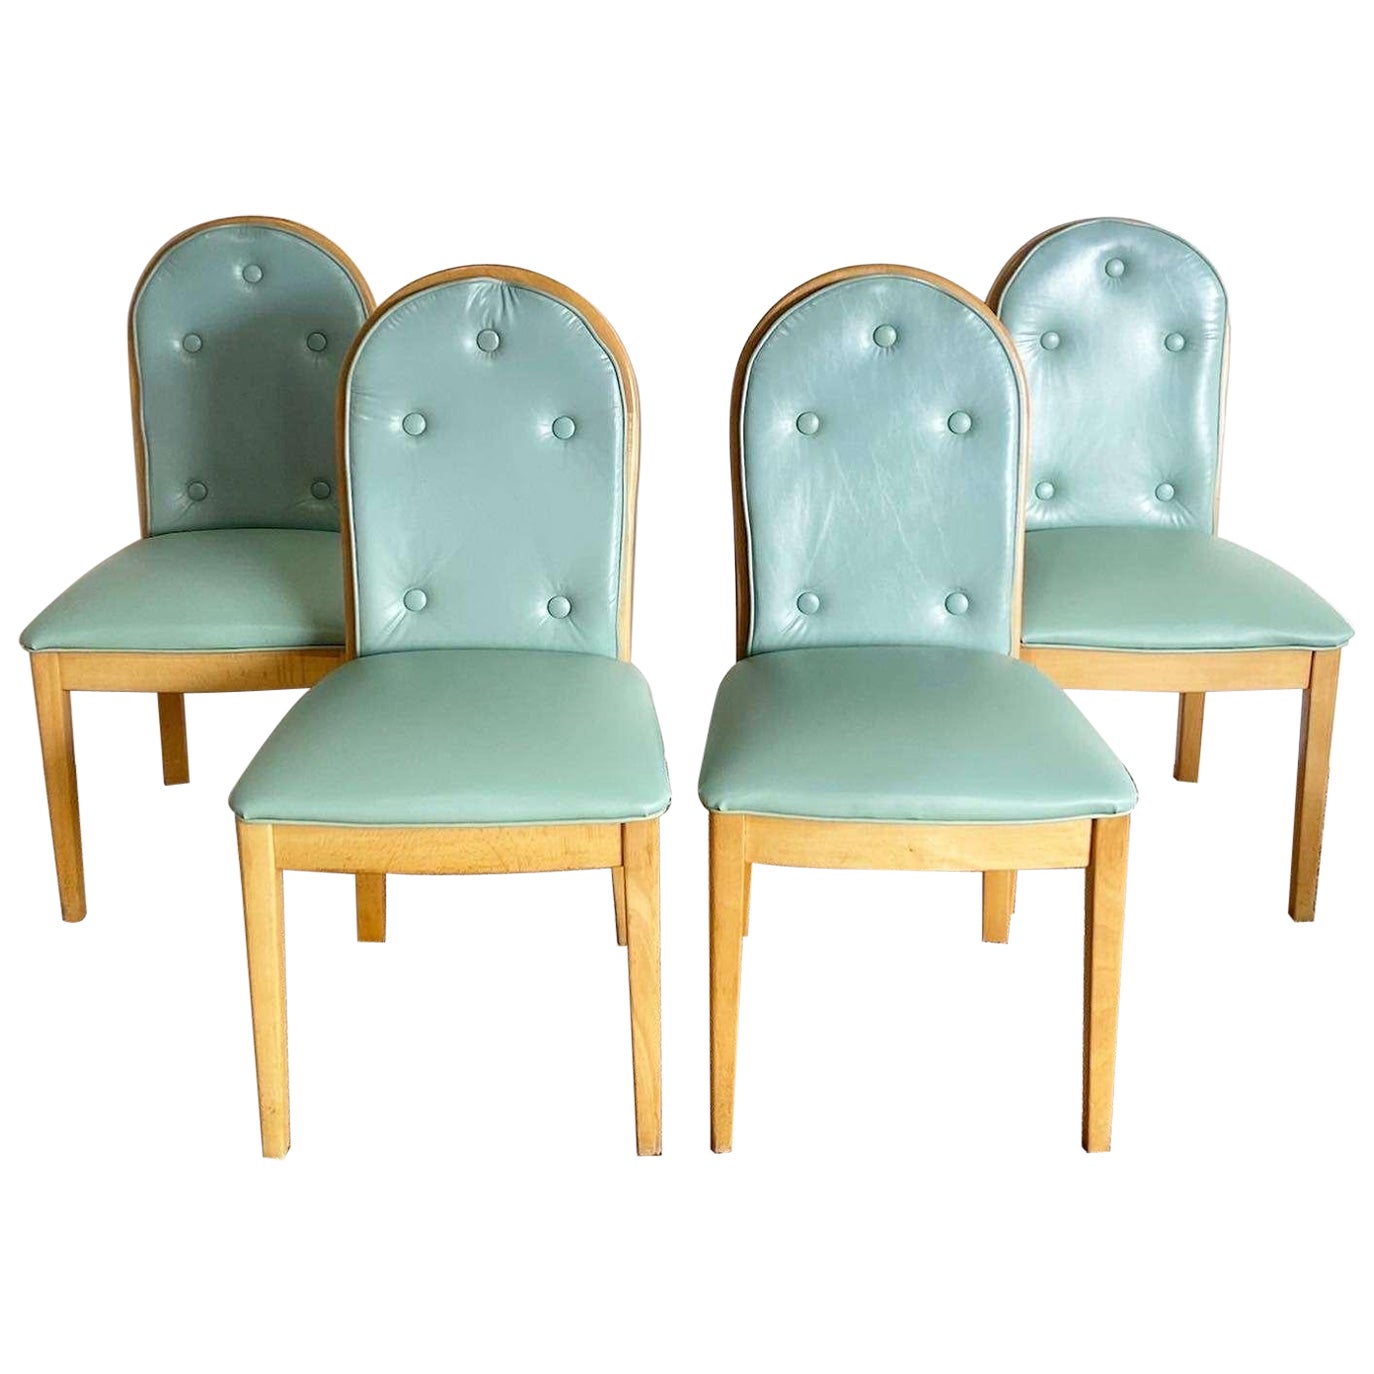 Boho Chic Cane Back Blue Tufted Vinyl Dining Chairs - Set of 4 For Sale